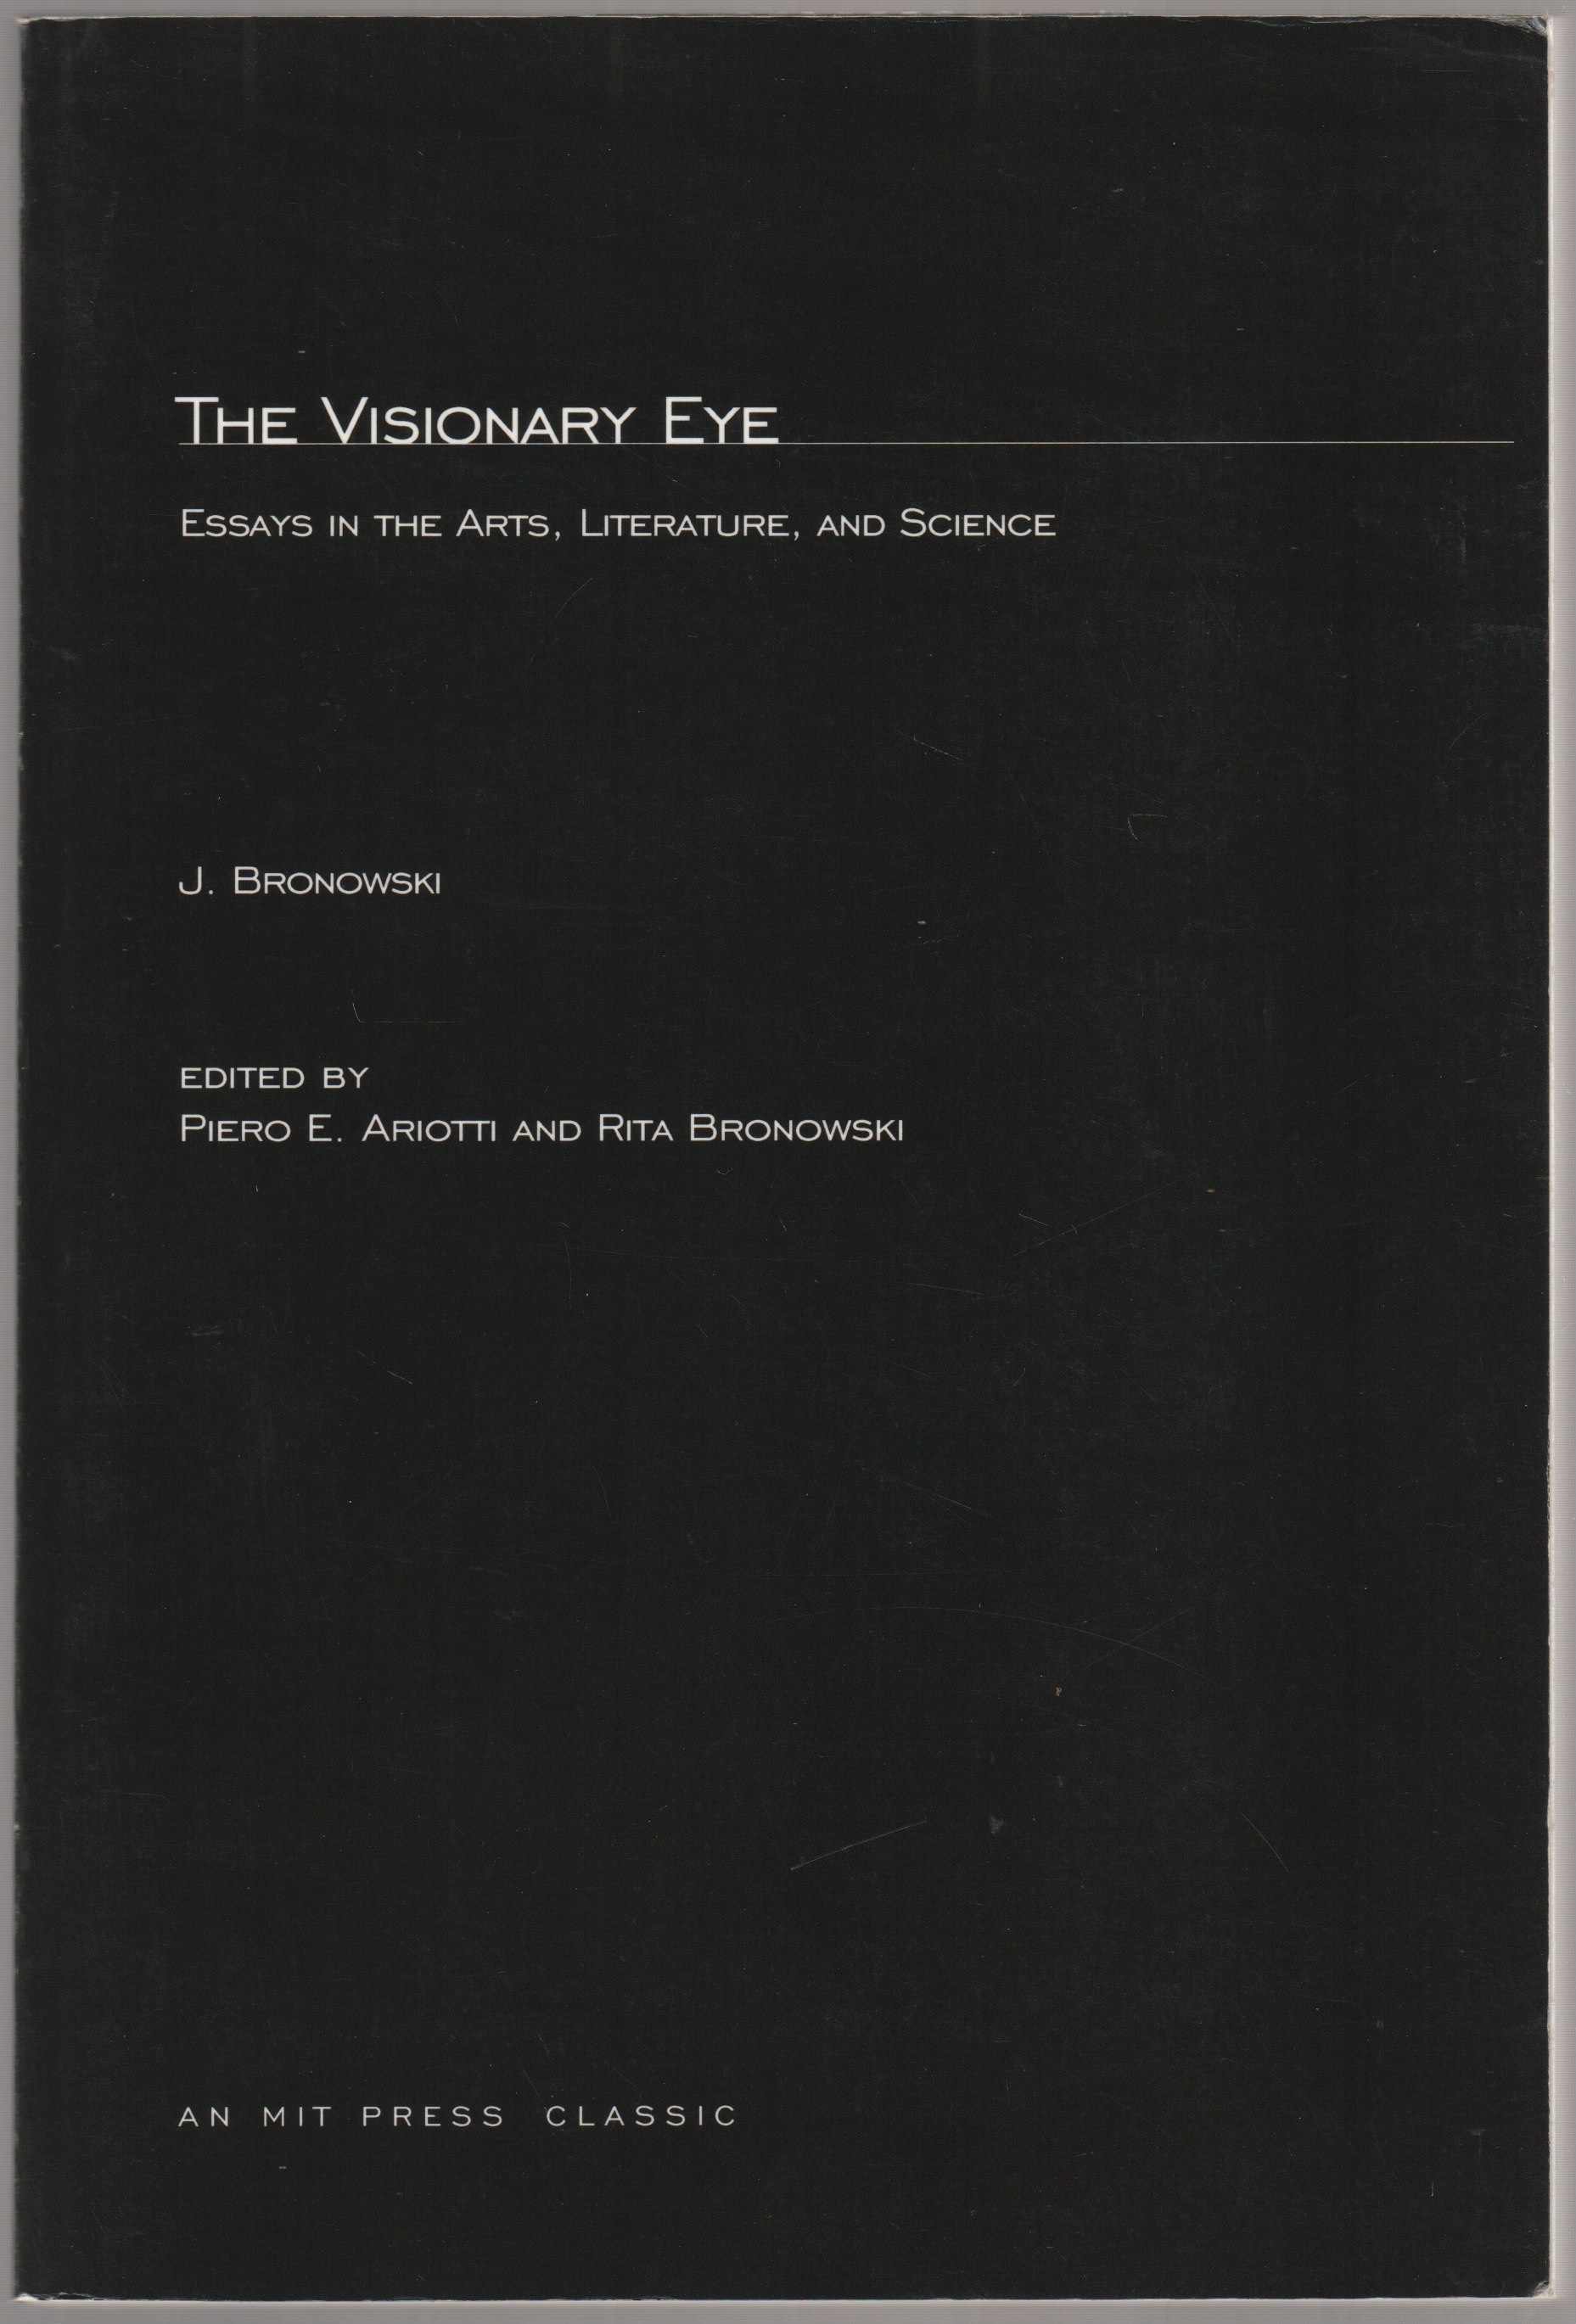 The visionary eye : essays in the arts, literature, and science.